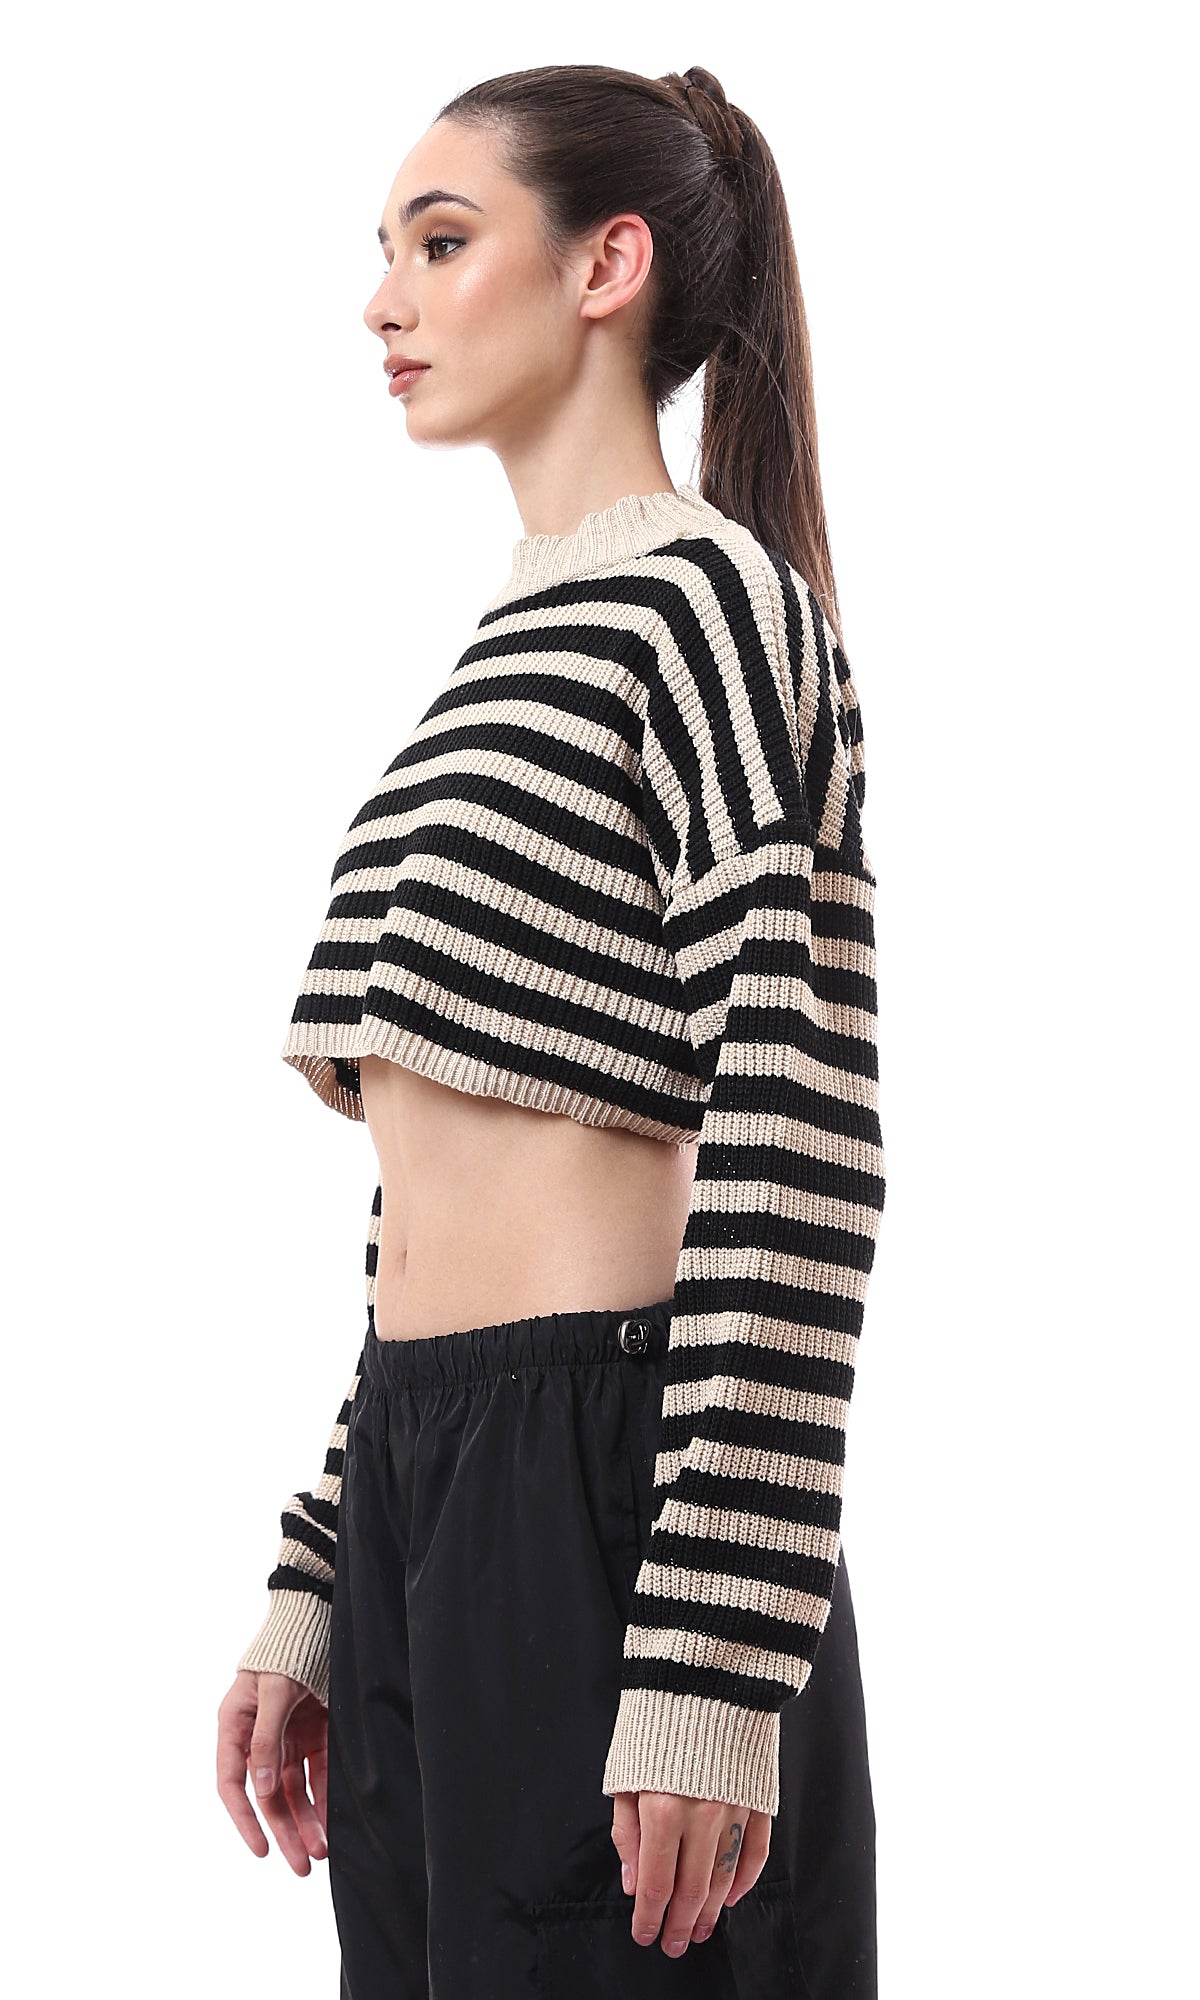 O172580 Beige & Black Stripes Knitted Cropped Pullover